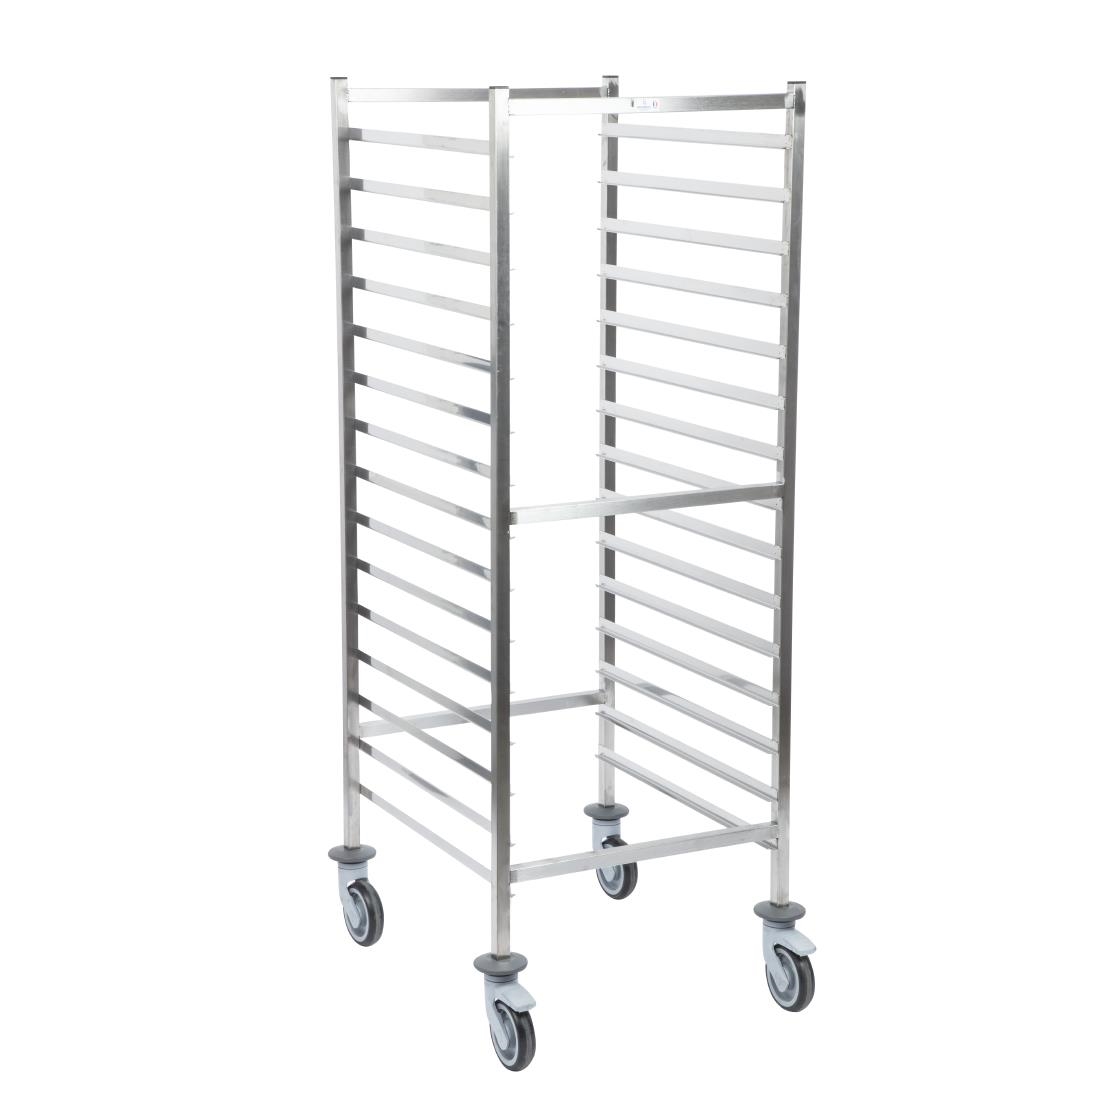 Matfer Bourgeat 15 Level Gastronorm Racking Trolley 2-1GN (CX730)